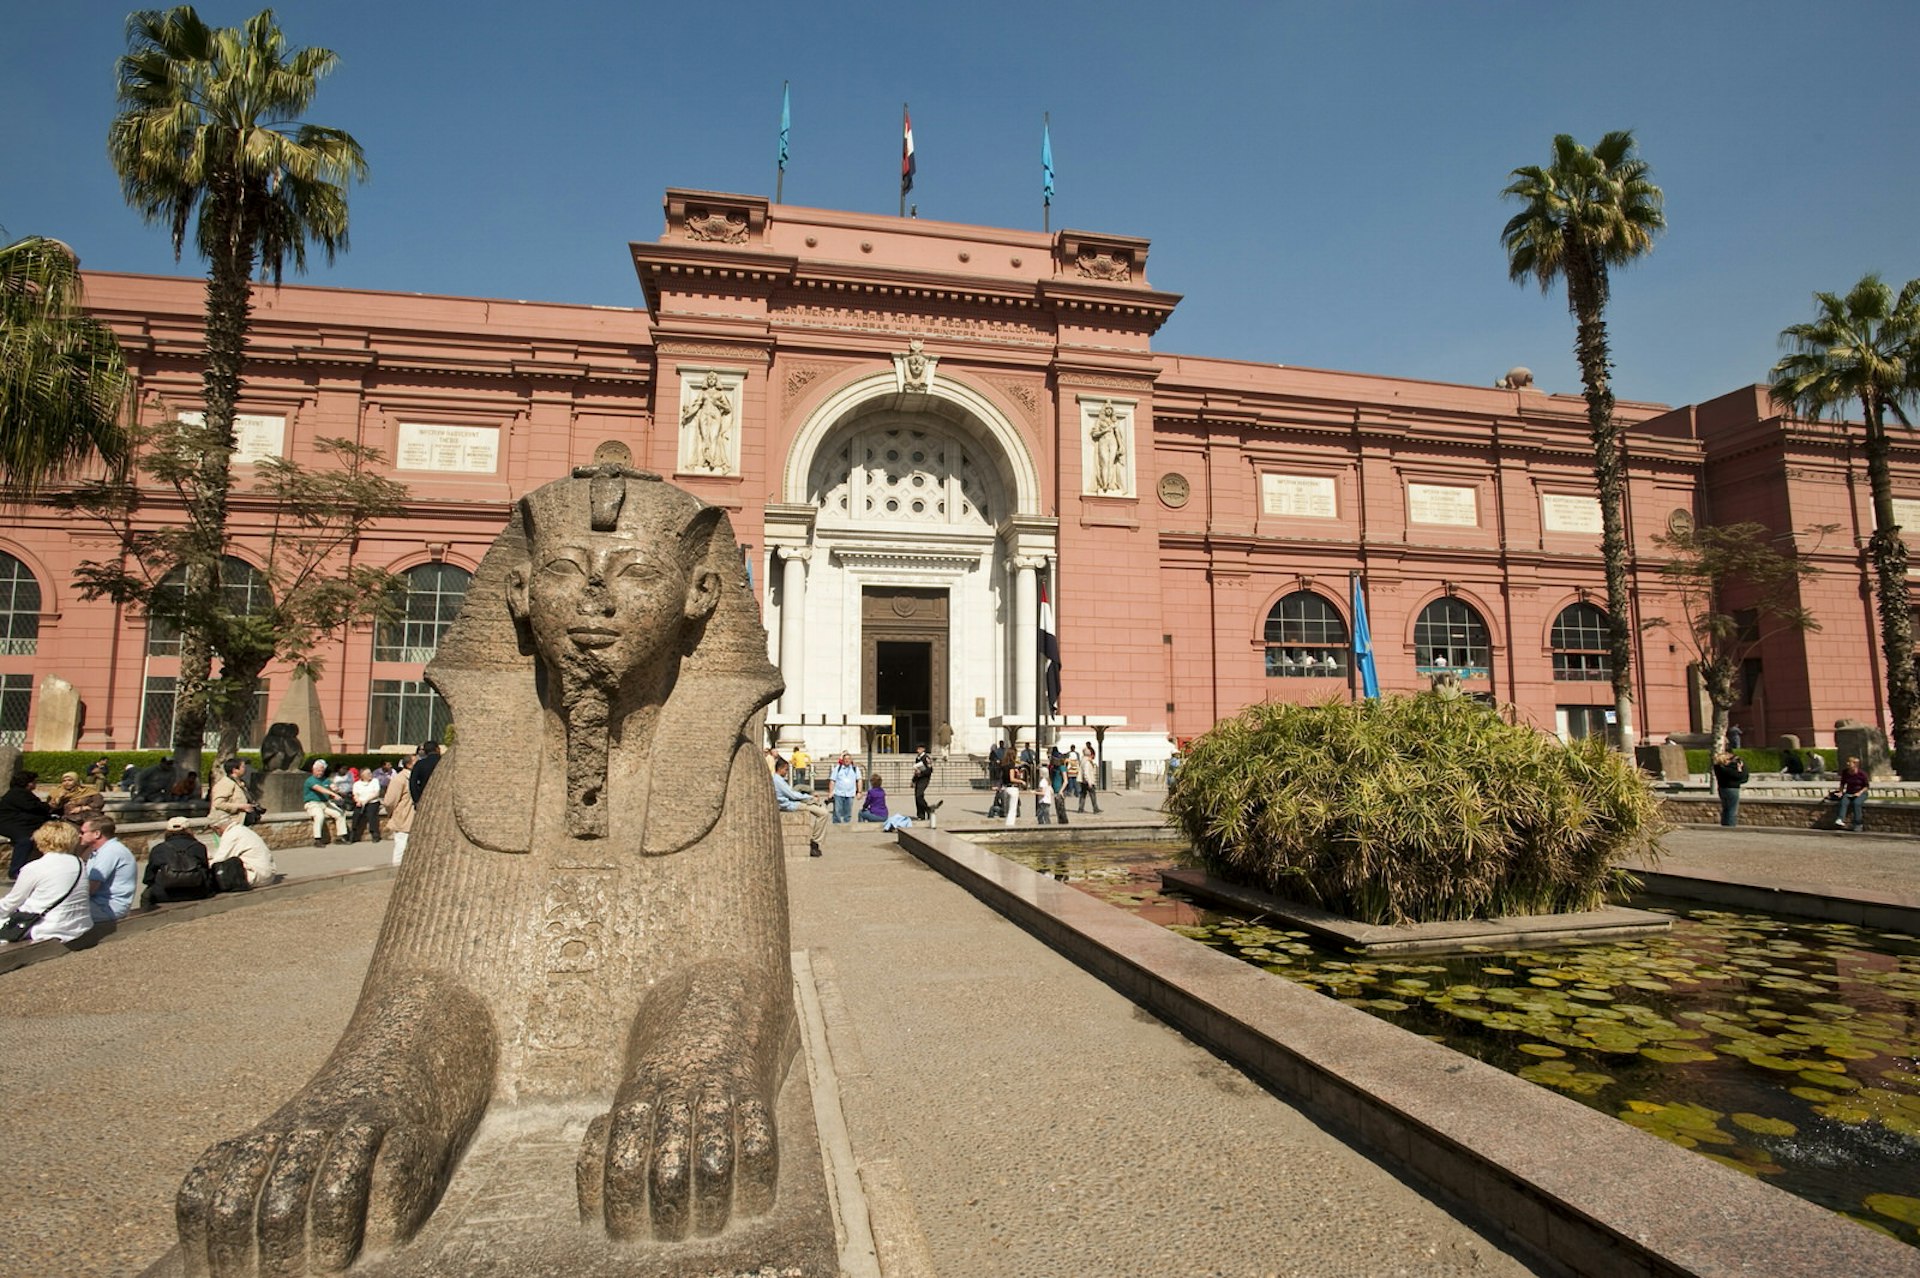 Egyptian Museum, Cairo, Egypt, North Africa, Africa. Image by Michael Snell / robertharding / Getty Images